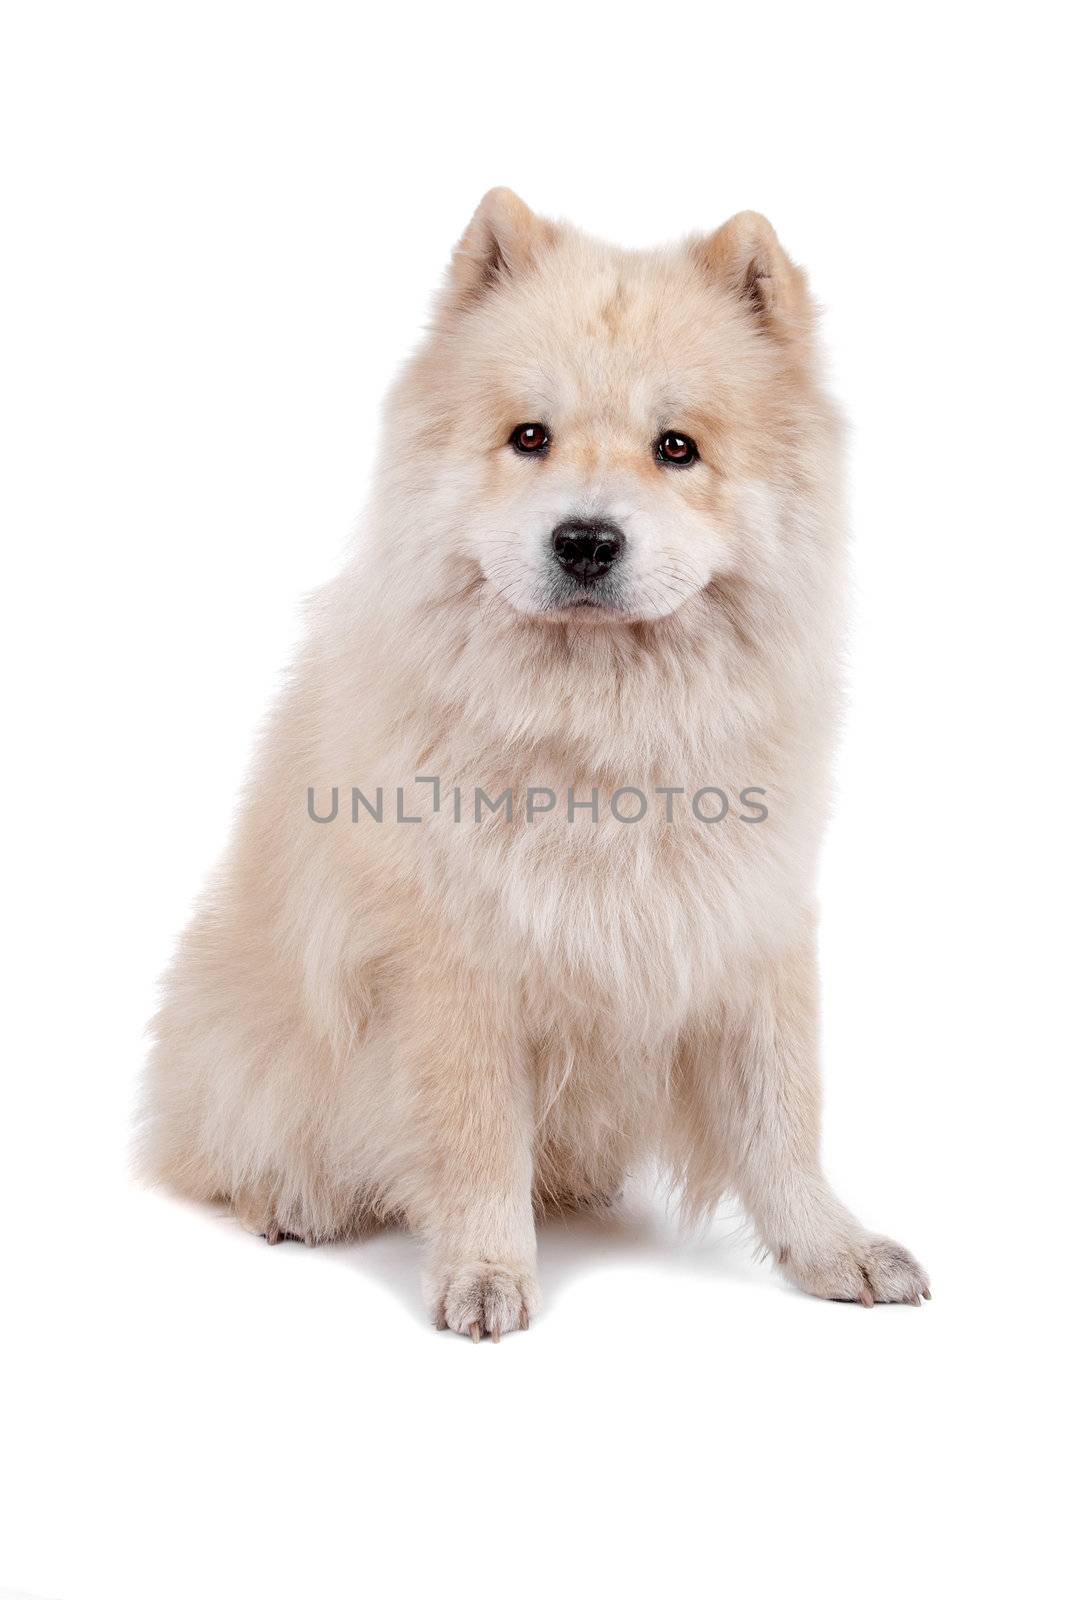 Mix Chow-Chow and Samoyed by eriklam